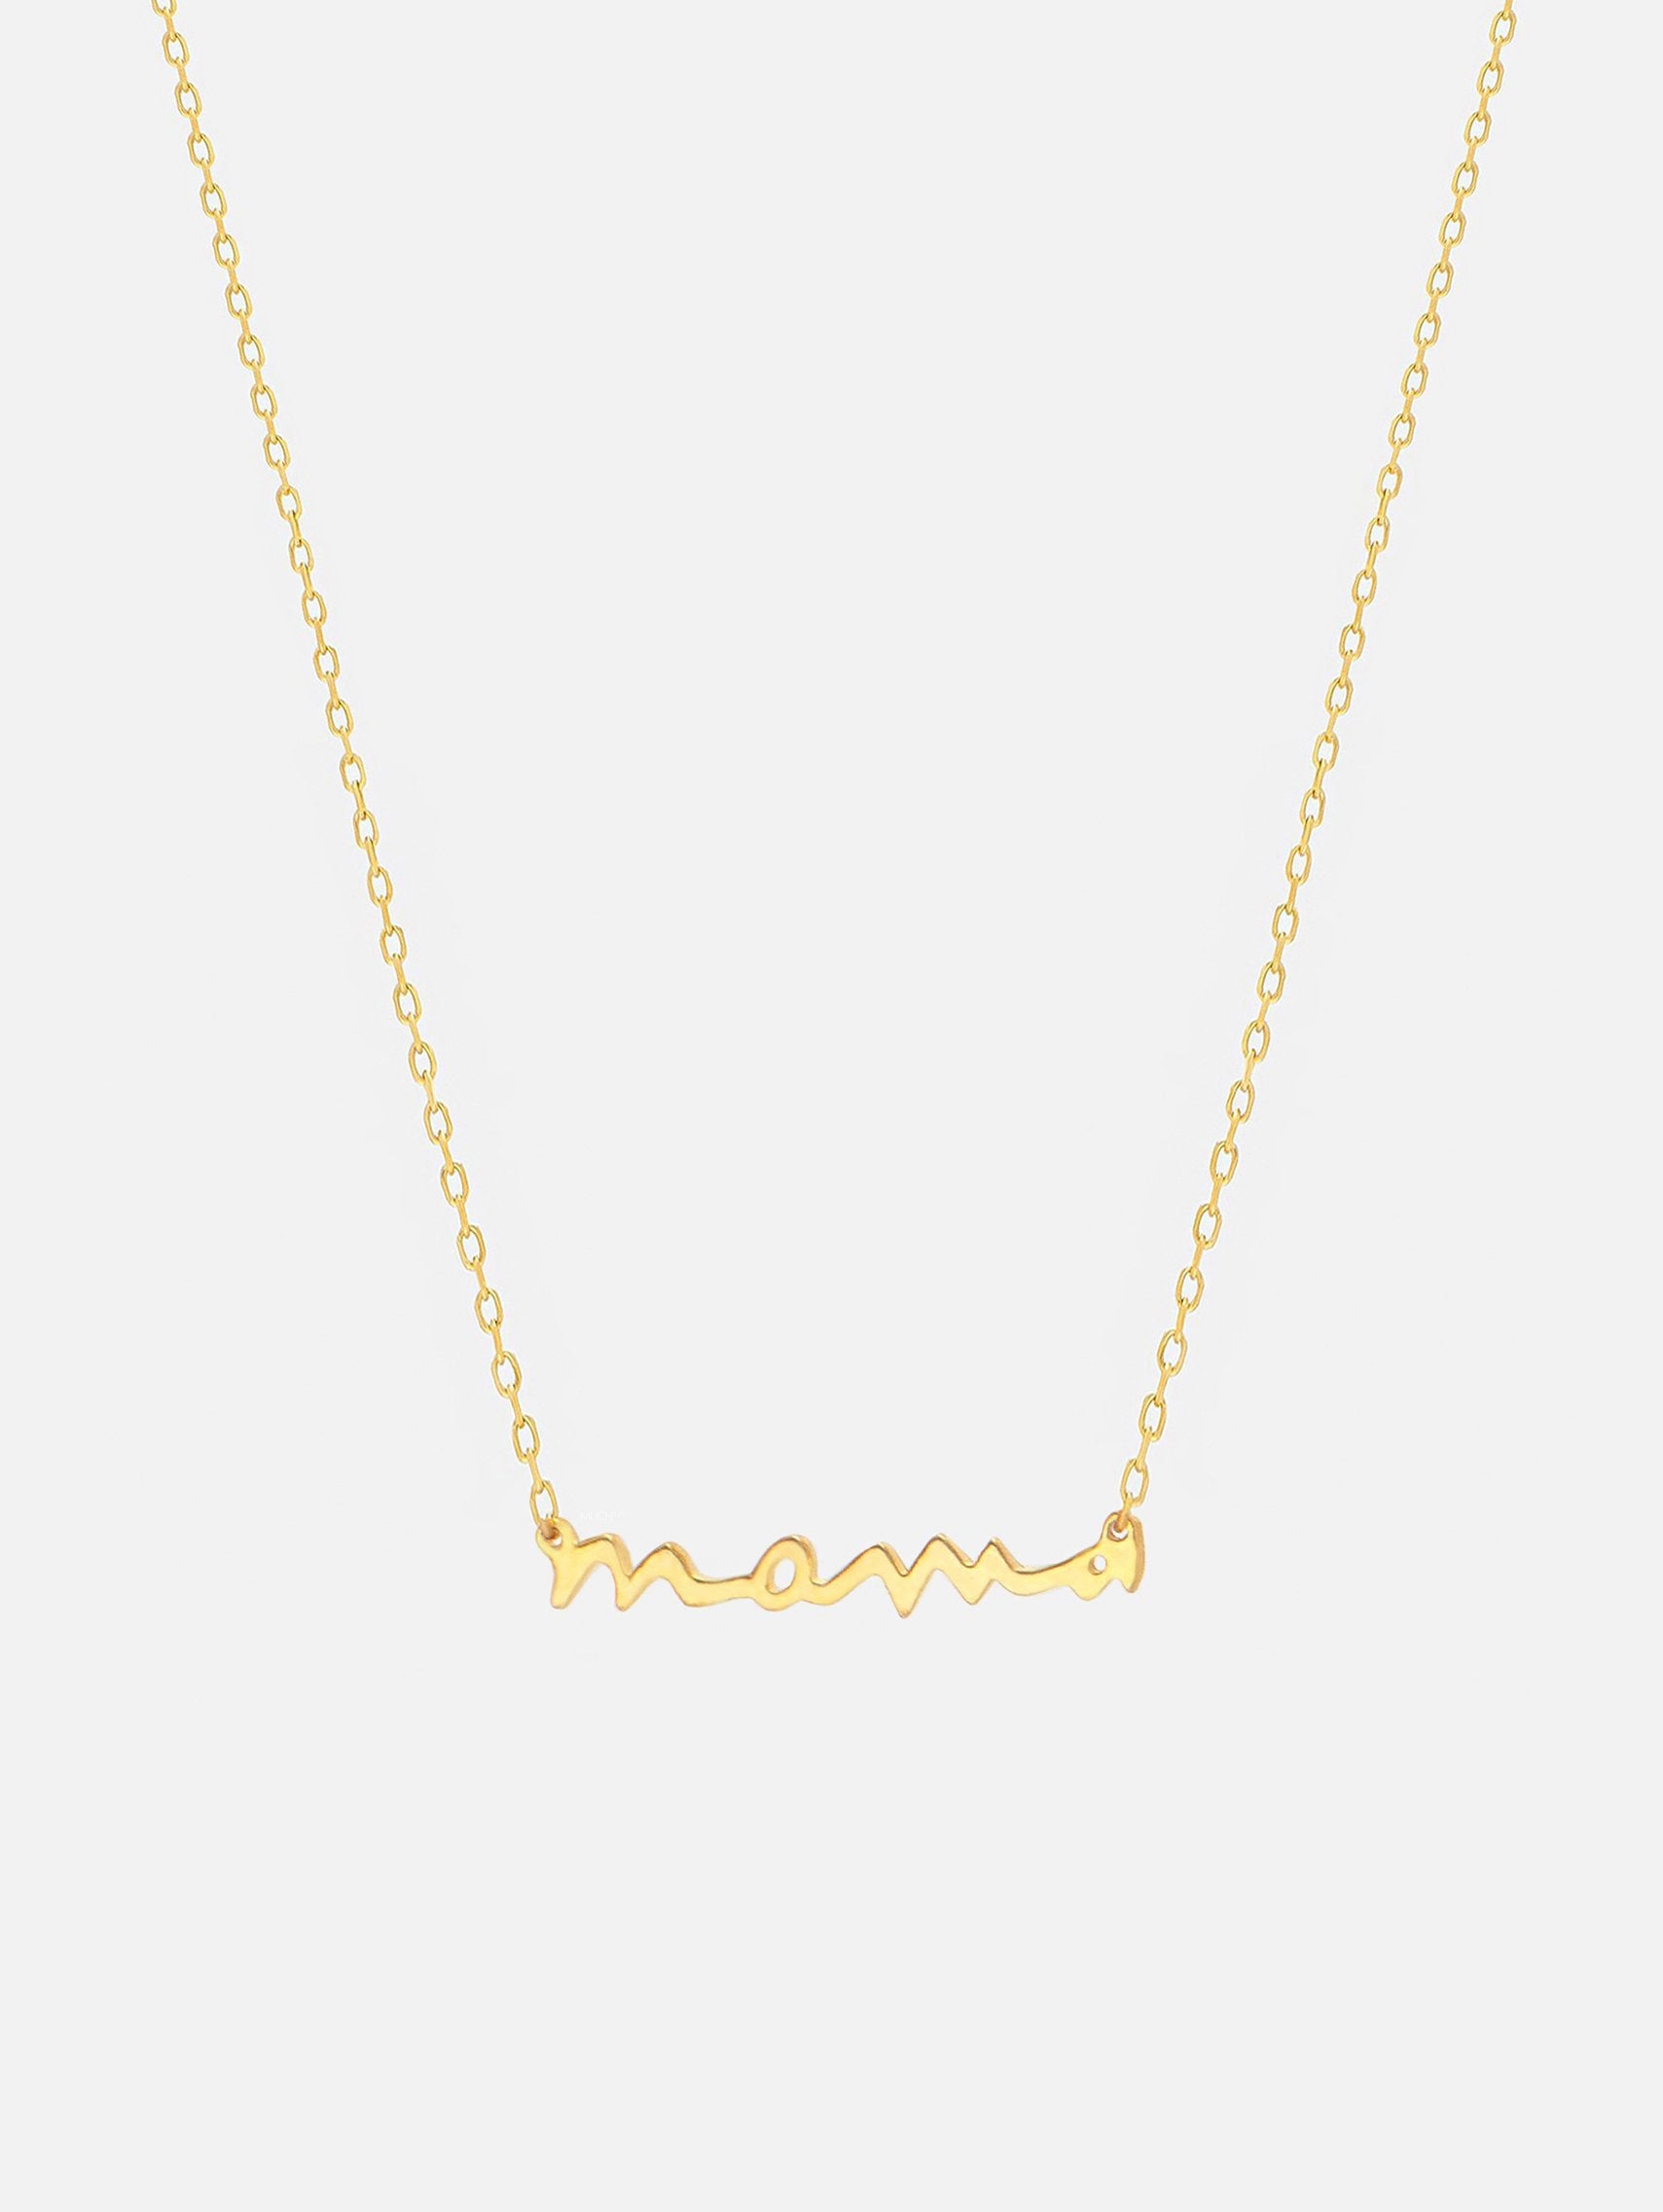 Gold necklace with the word mama in a handwritten script style.